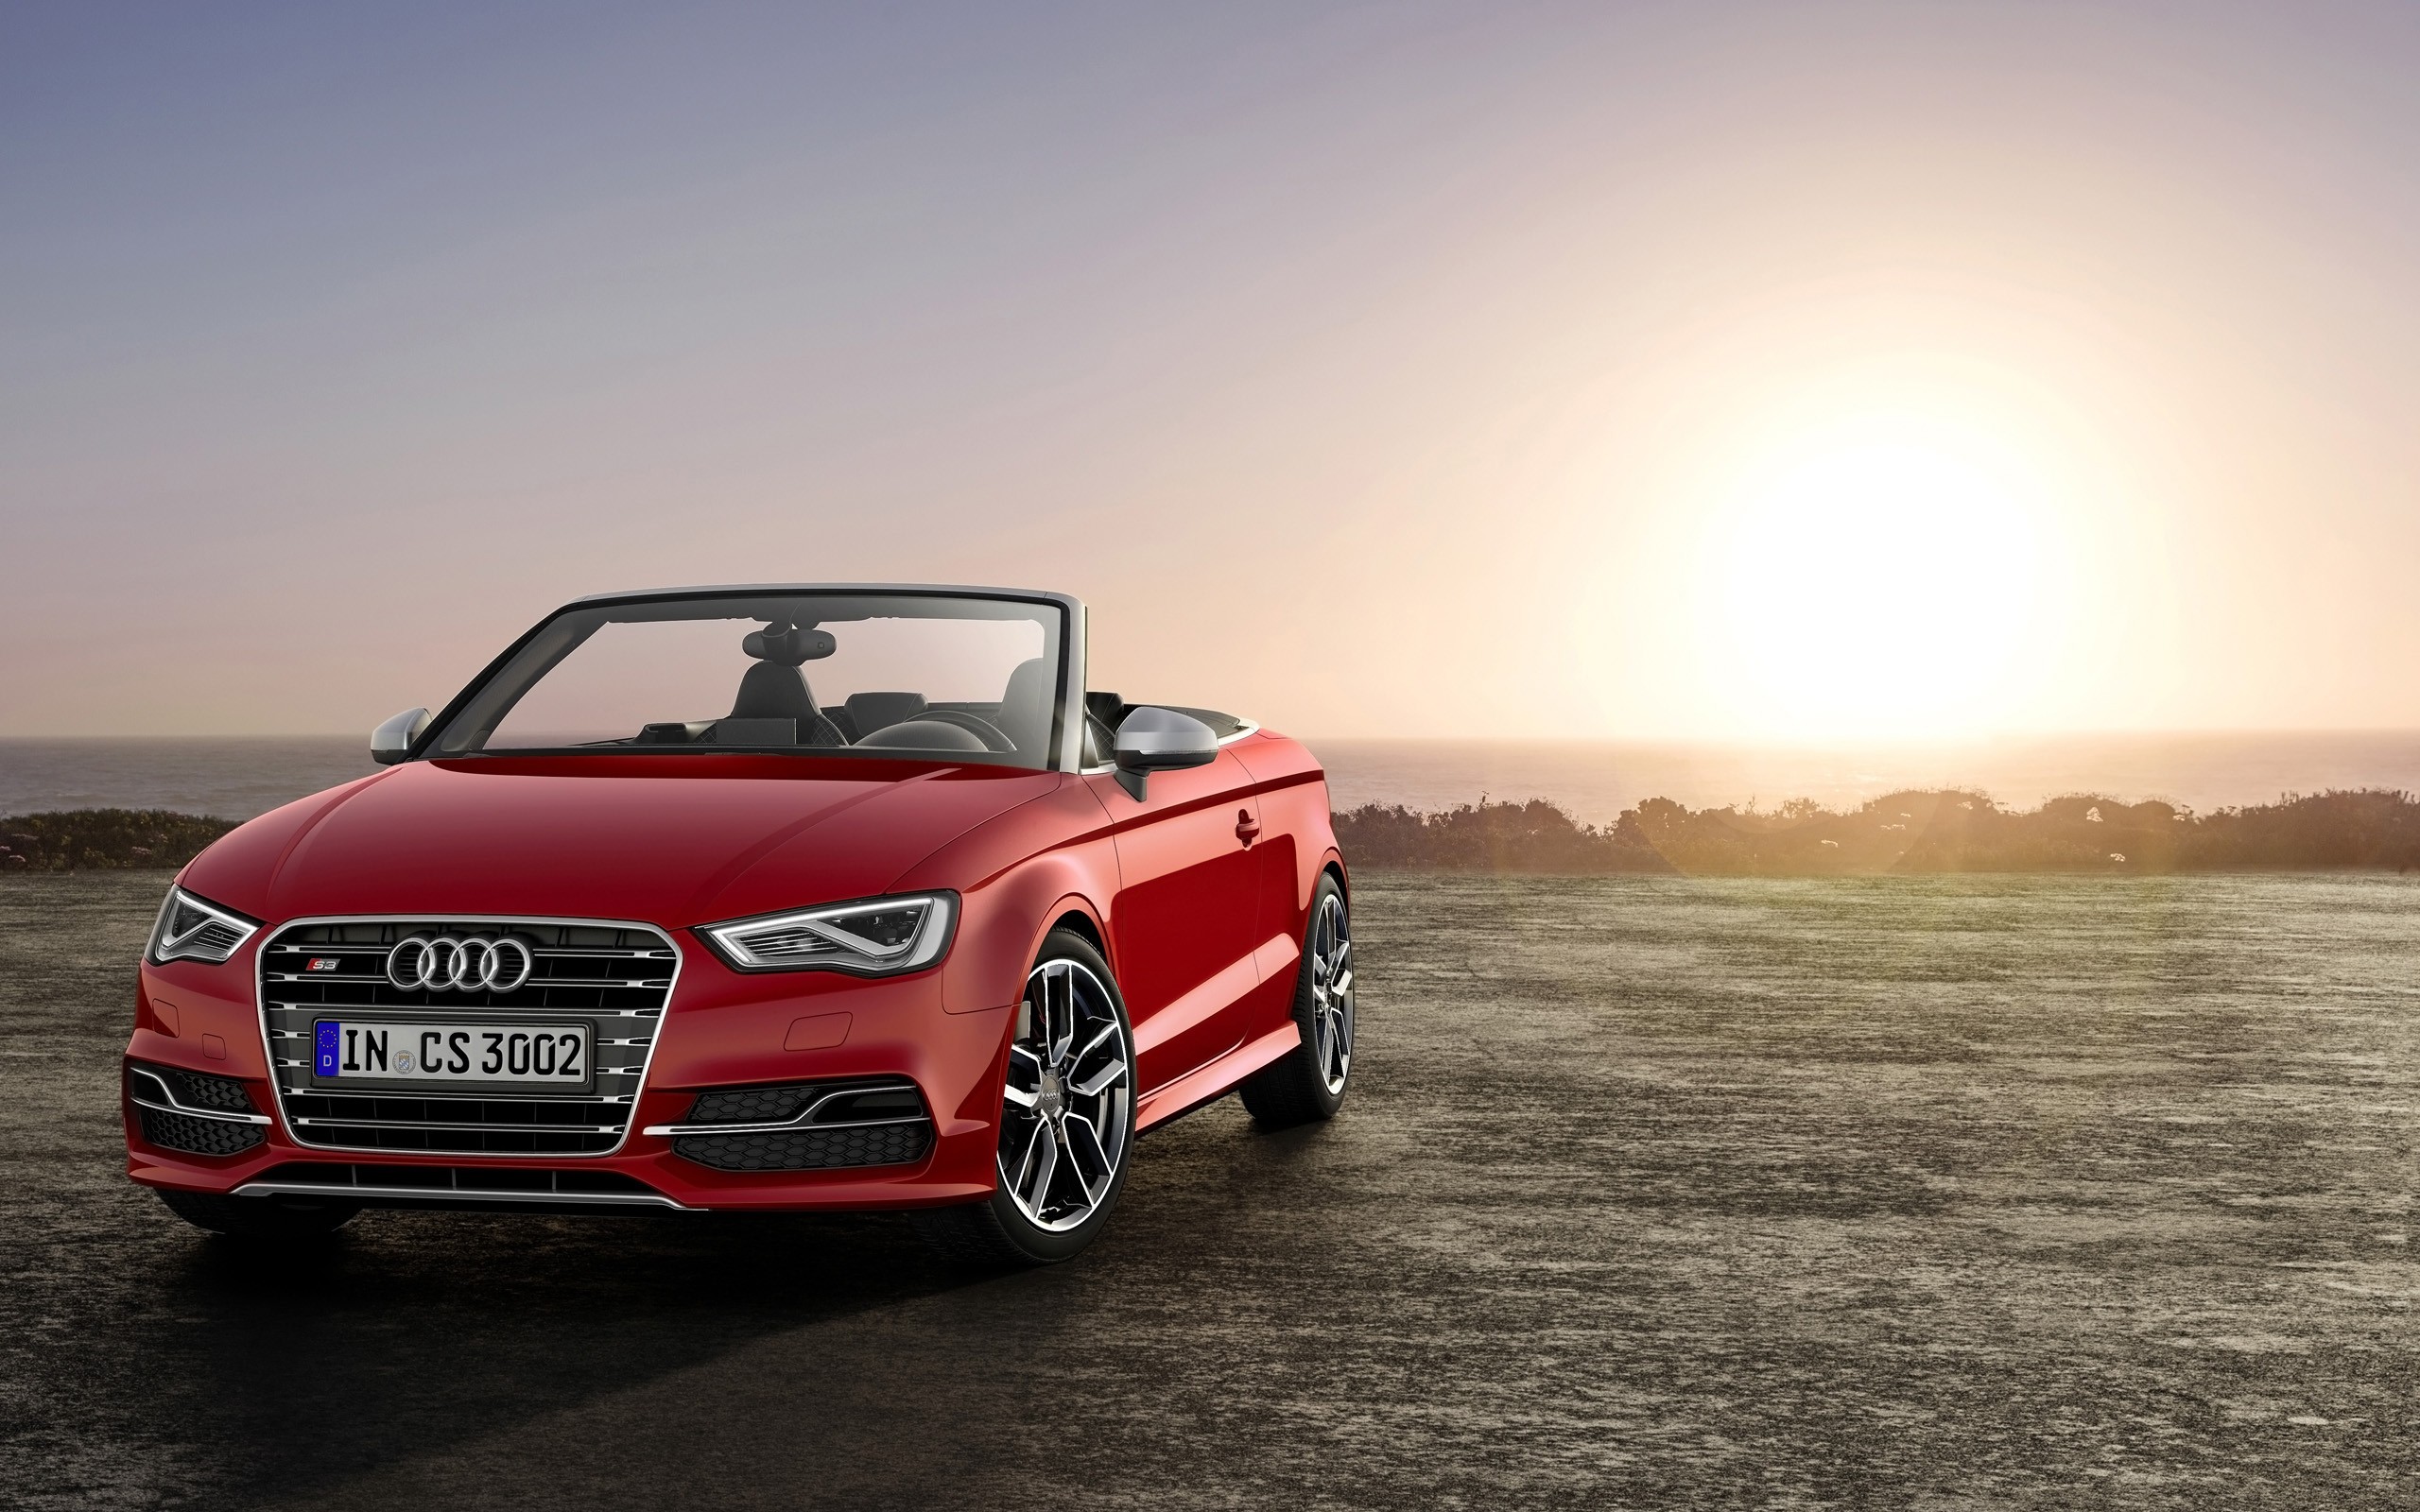 General 2560x1600 car Audi A3 Audi numbers sunlight vehicle red cars convertible Roadster German cars Volkswagen Group